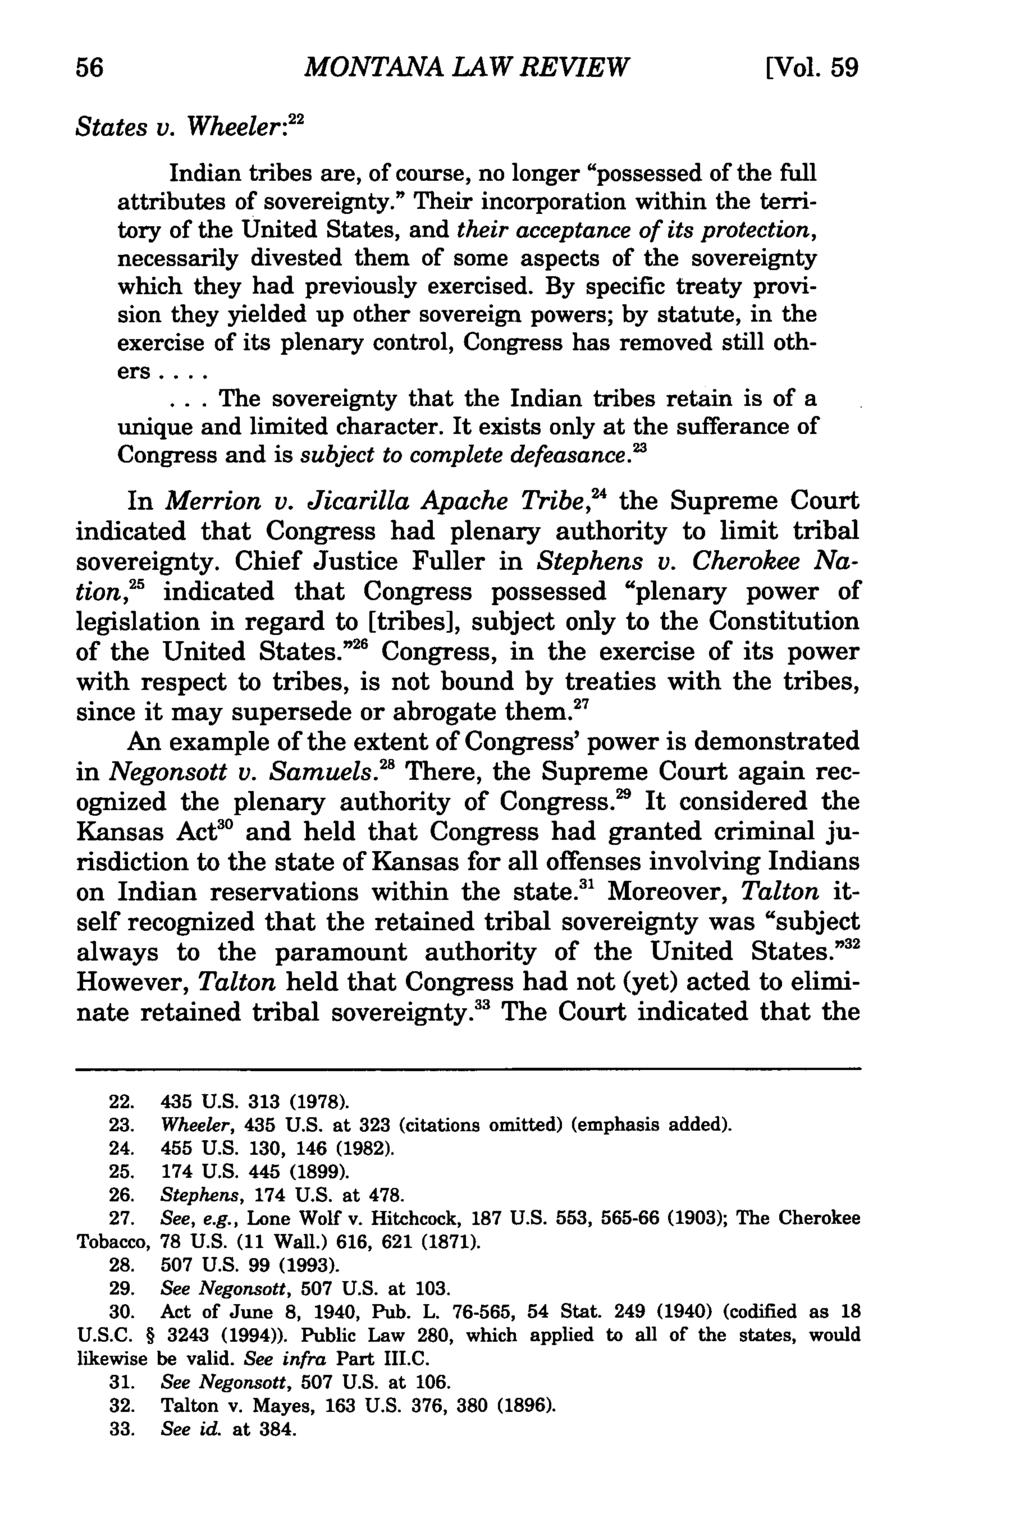 Montana MONTANA Law Review, LAW Vol. REVIEW 59 [1998], Iss. 1, Art. 4 [Vol. 59 States v. Wheeler: 22 Indian tribes are, of course, no longer "possessed of the full attributes of sovereignty.